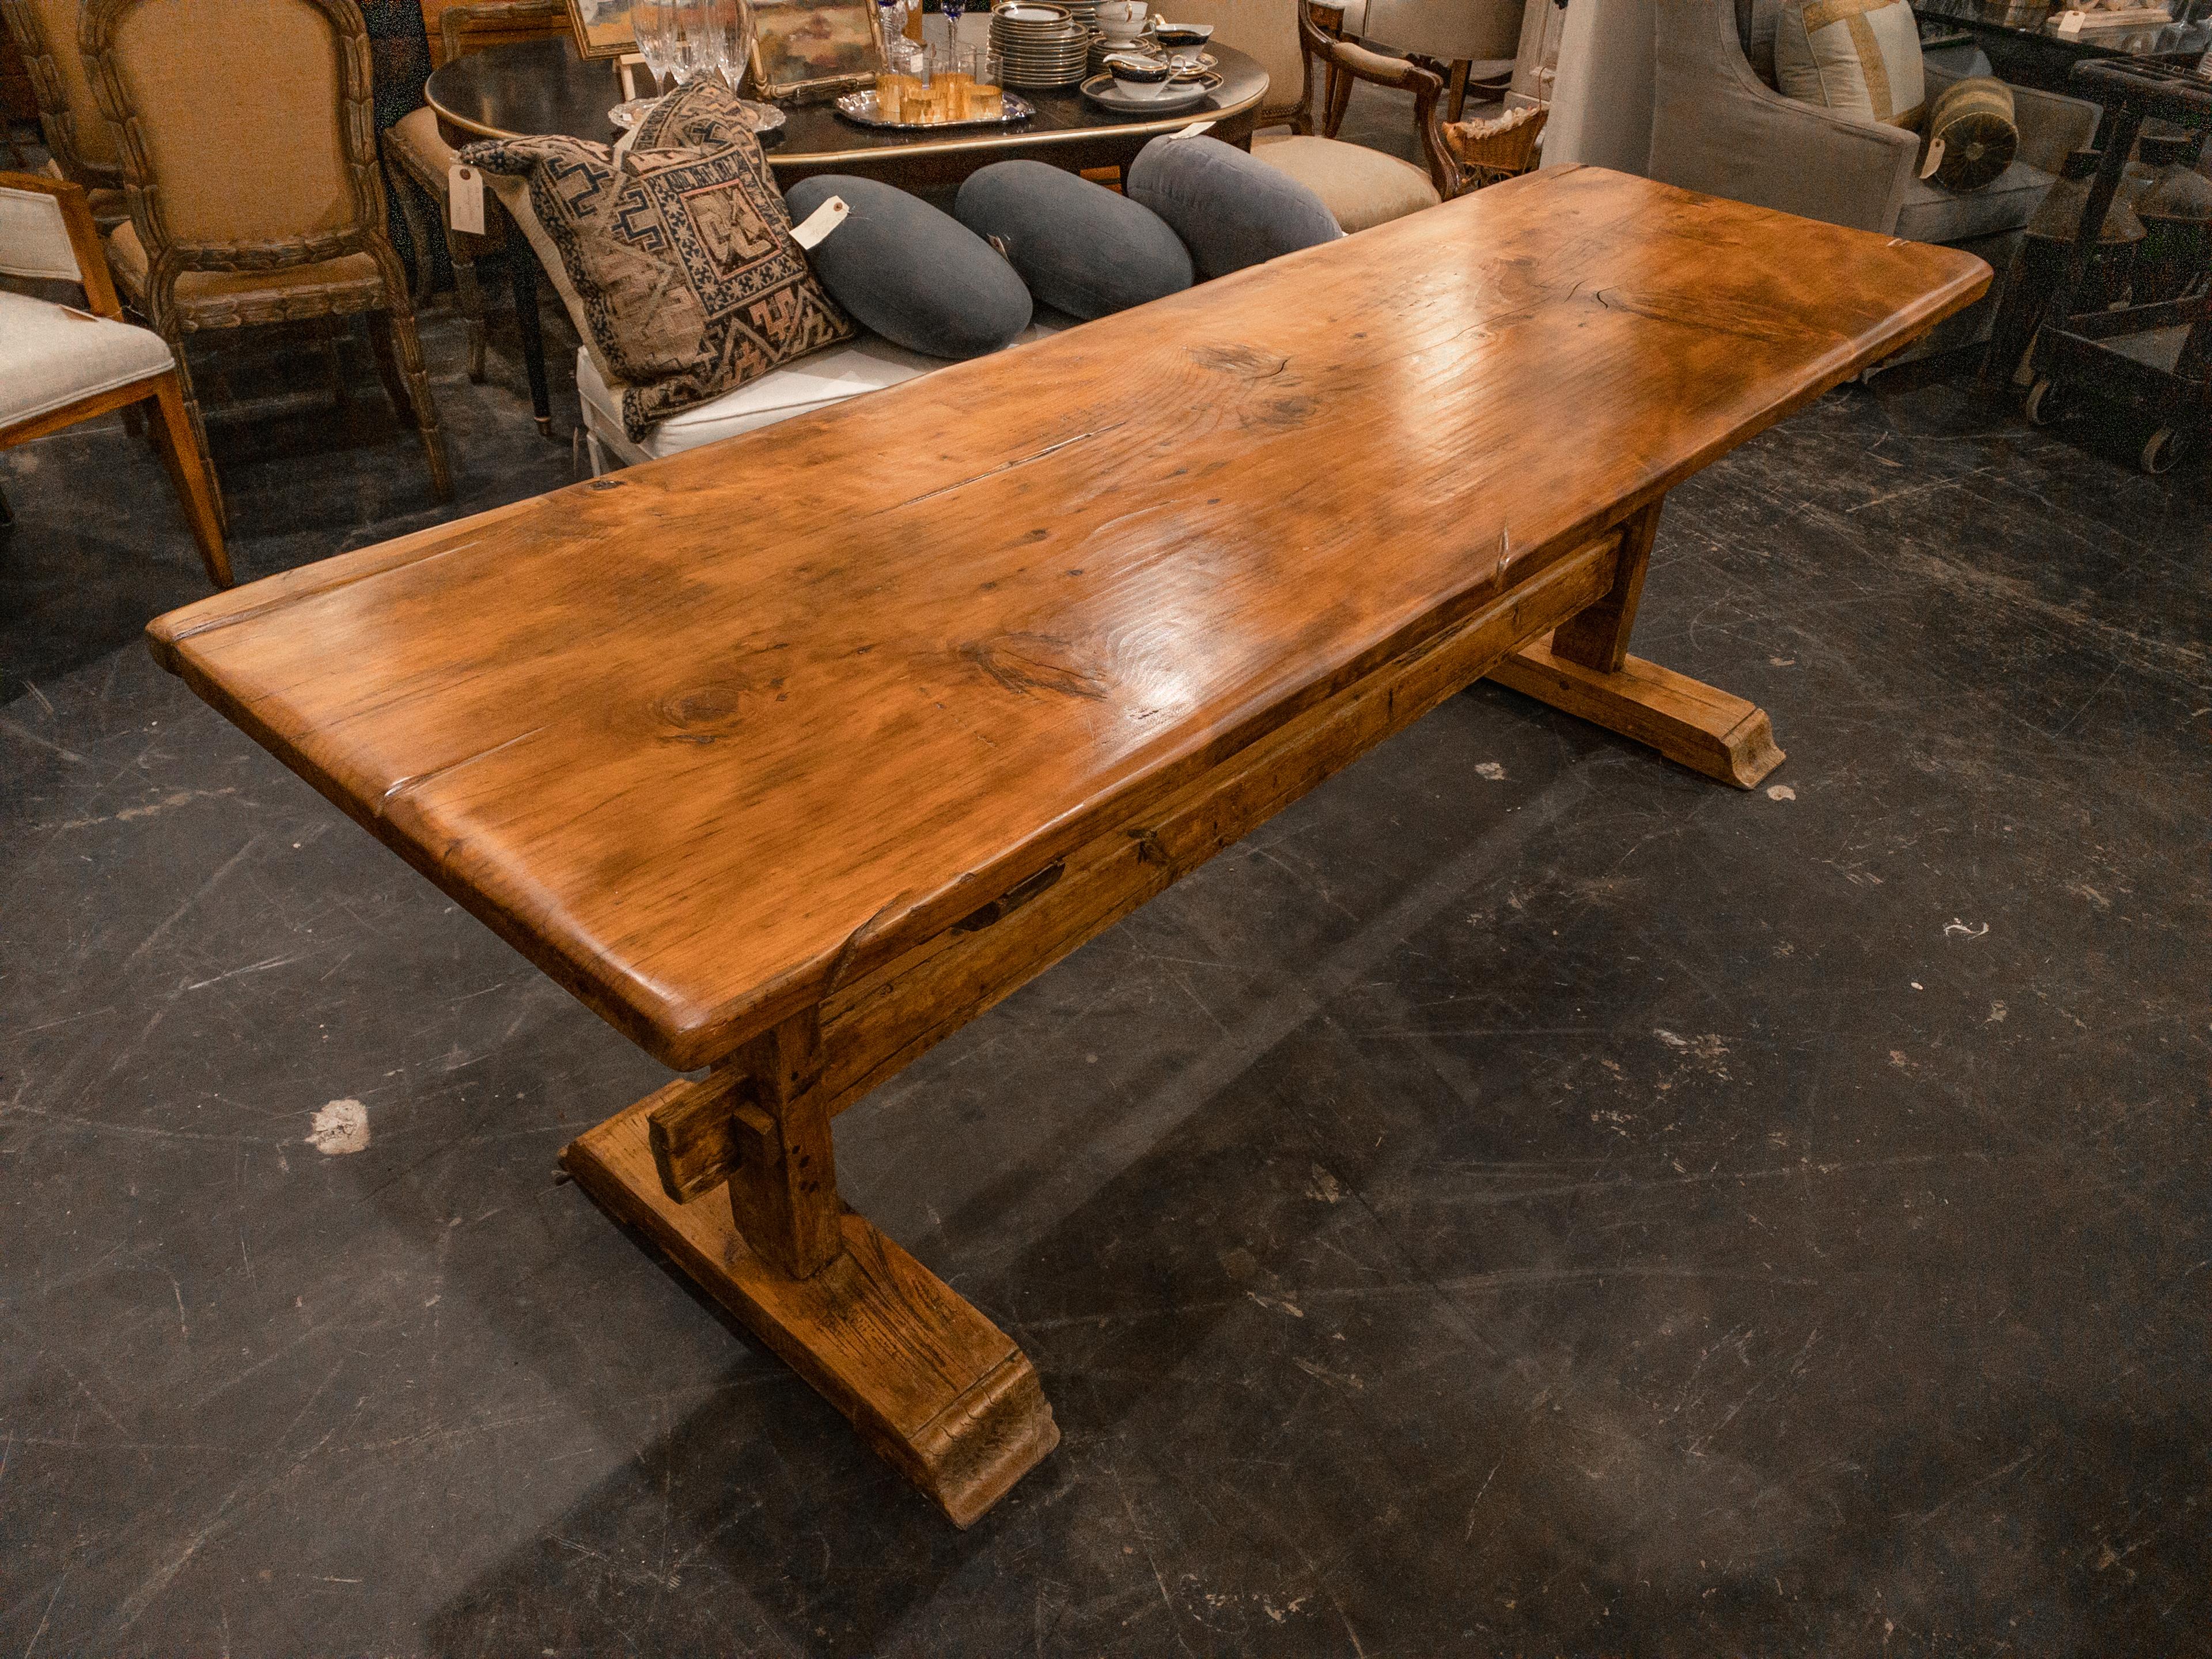 The 20th Century Pine Trestle Table epitomizes the rustic charm and functionality of its era. Crafted from solid pine, it boasts a sturdy trestle base that provides stability and durability. With its natural wood grain and warm finish, the table